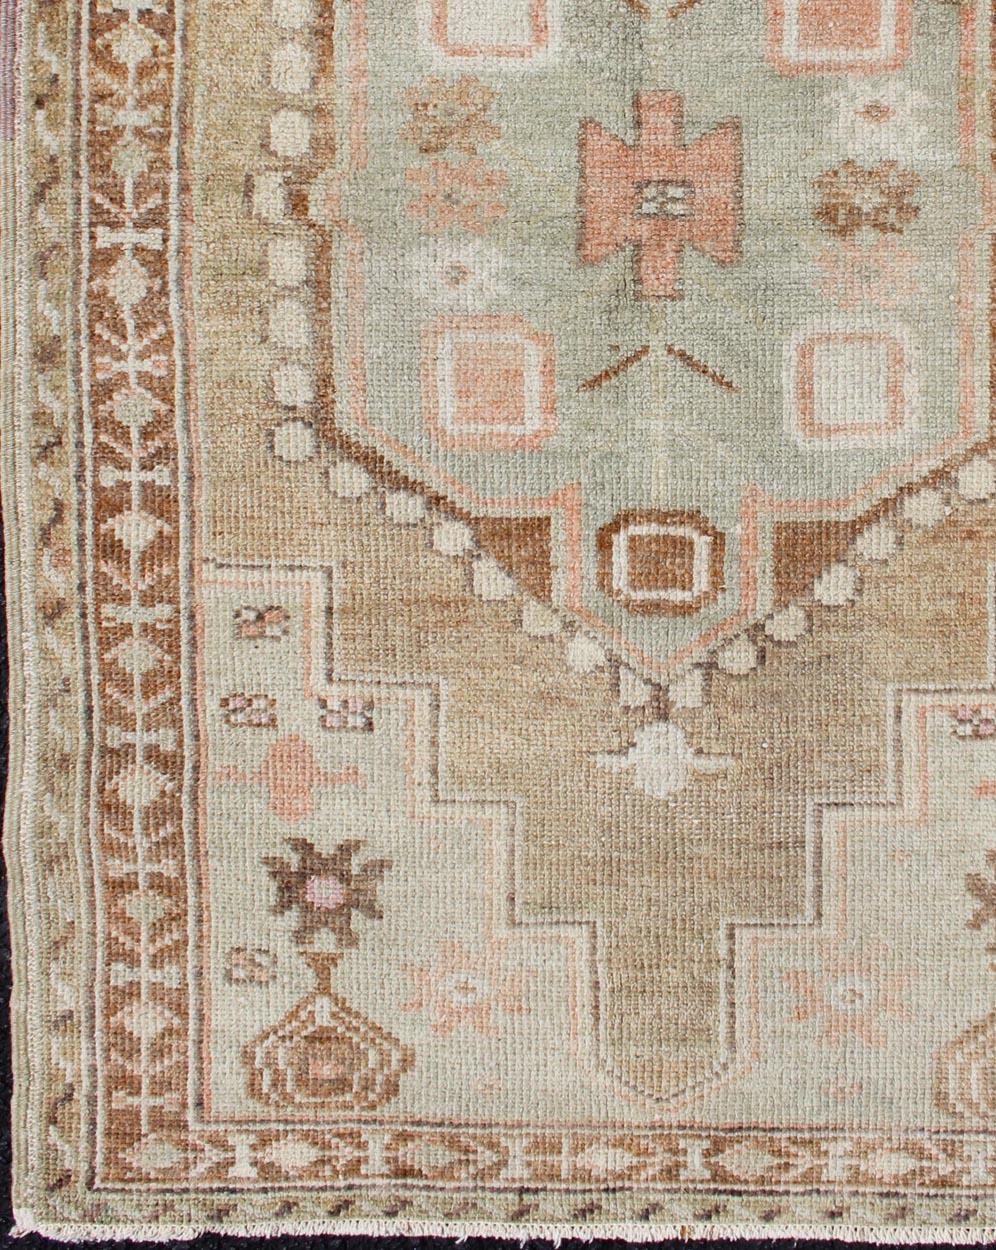 Beautiful Turkish rug with cheerful design, rug en-176299, country of origin / type: Turkey / Oushak, circa 1930

This antique Turkish Oushak rug features a central medallion design flanked by various tribal and geometric motifs. The entirety of